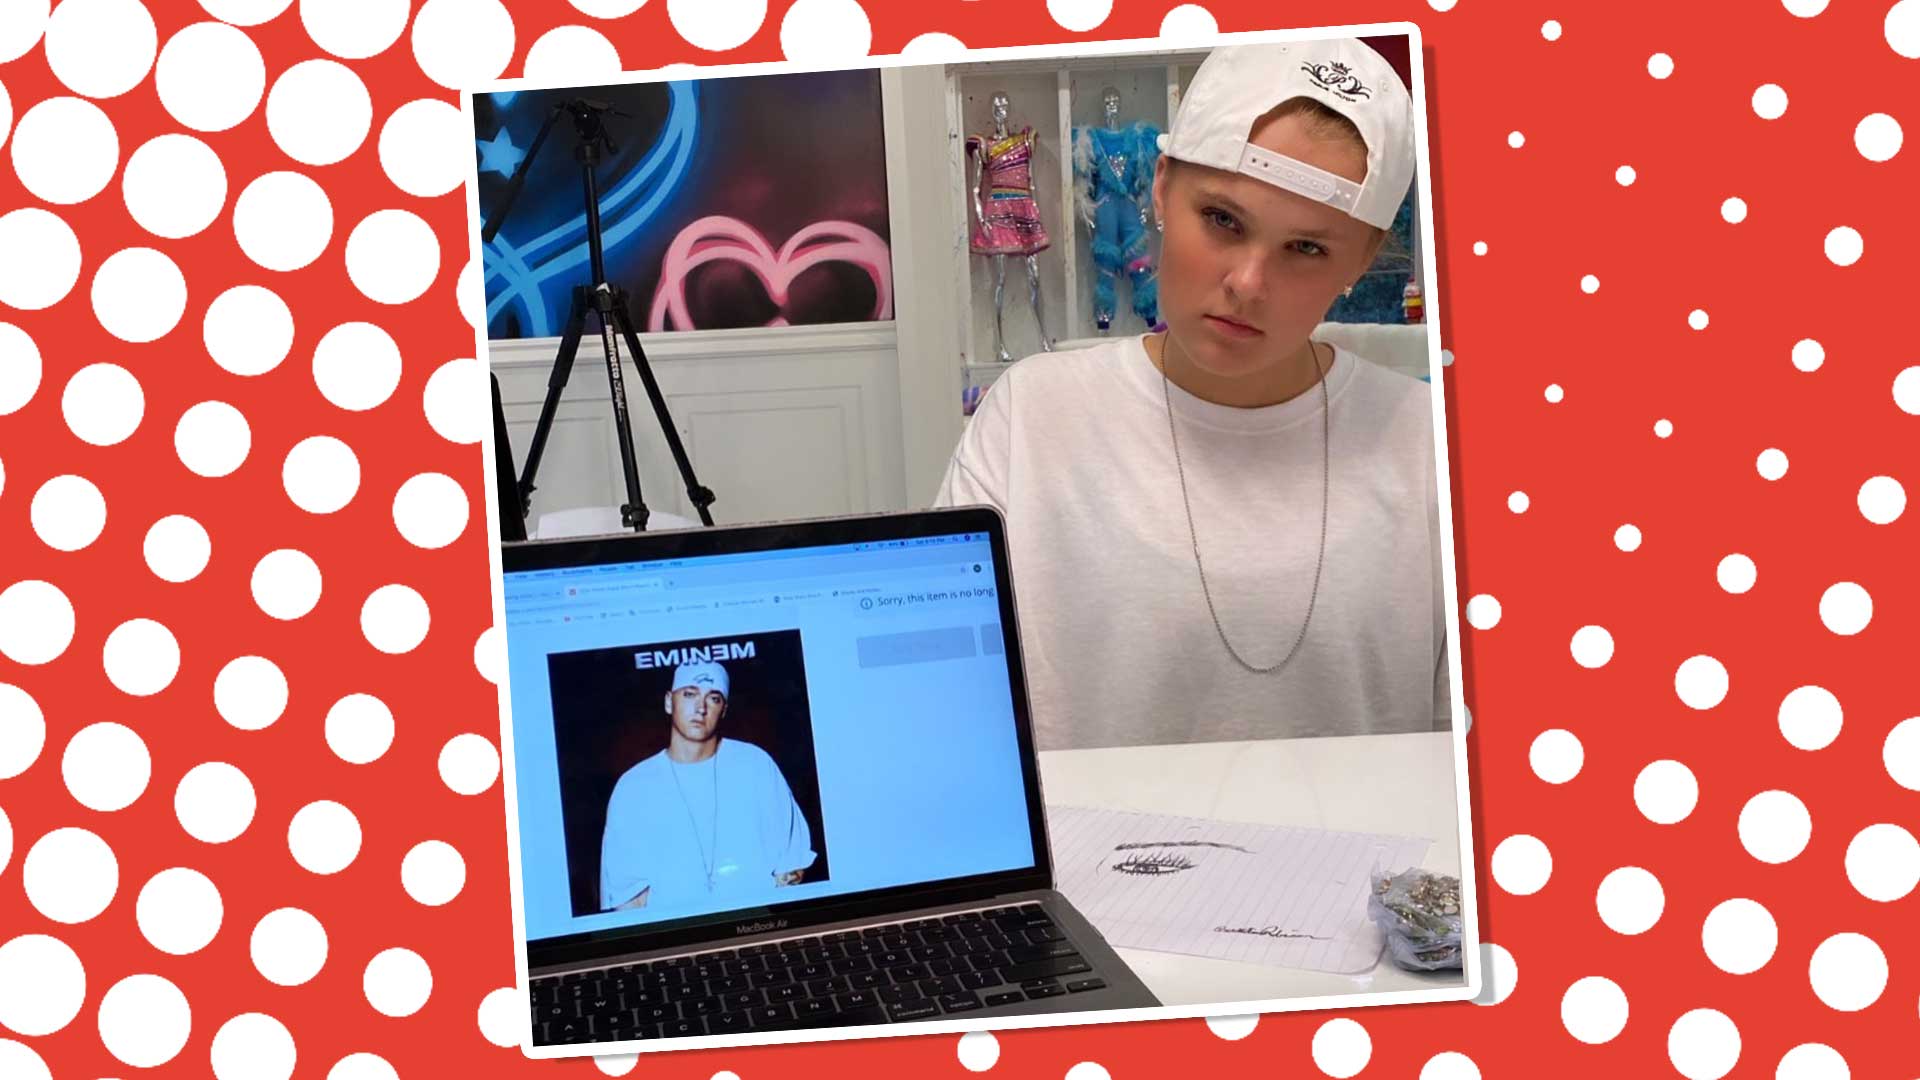 JoJo Siwa standing in front of a laptop which shows a picture of the rapper Eminem